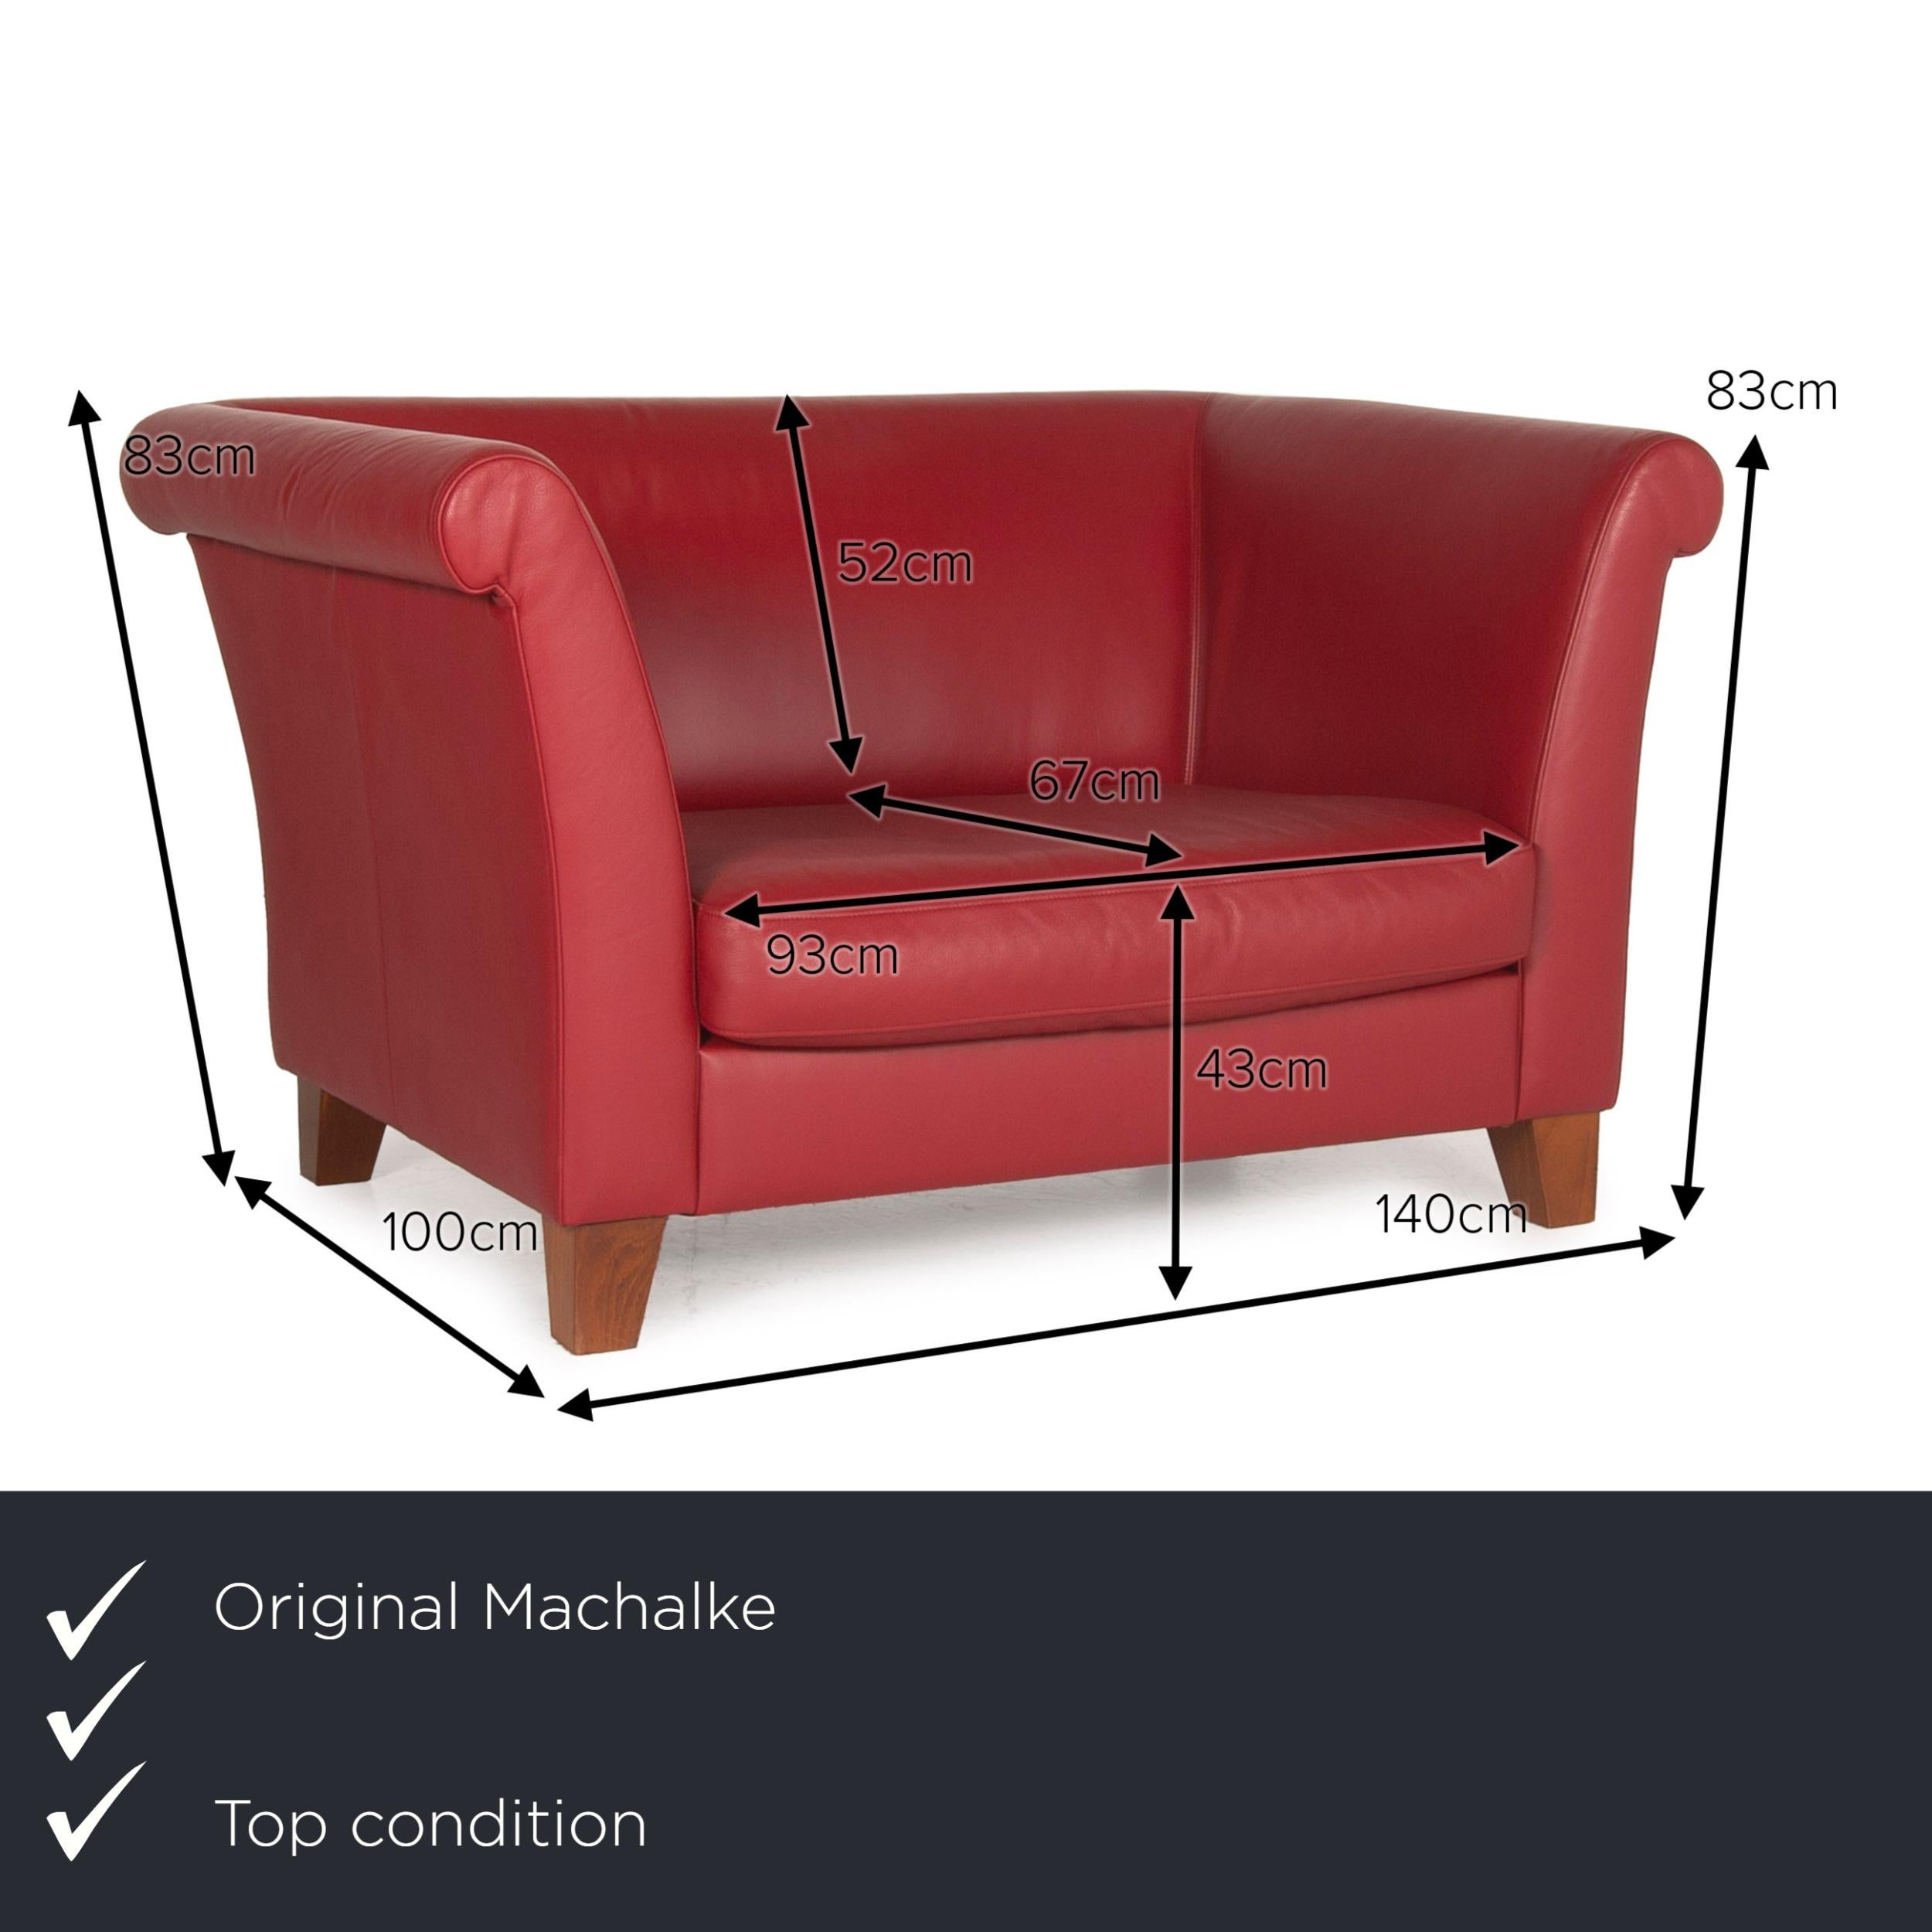 We present to you a Machalke Ritz leather armchair red wine red loveseat.
 

 Product measurements in centimeters:
 

Depth: 100
Width: 140
Height: 83
Seat height: 43
Rest height: 83
Seat depth: 67
Seat width: 93
Back height: 52.

 